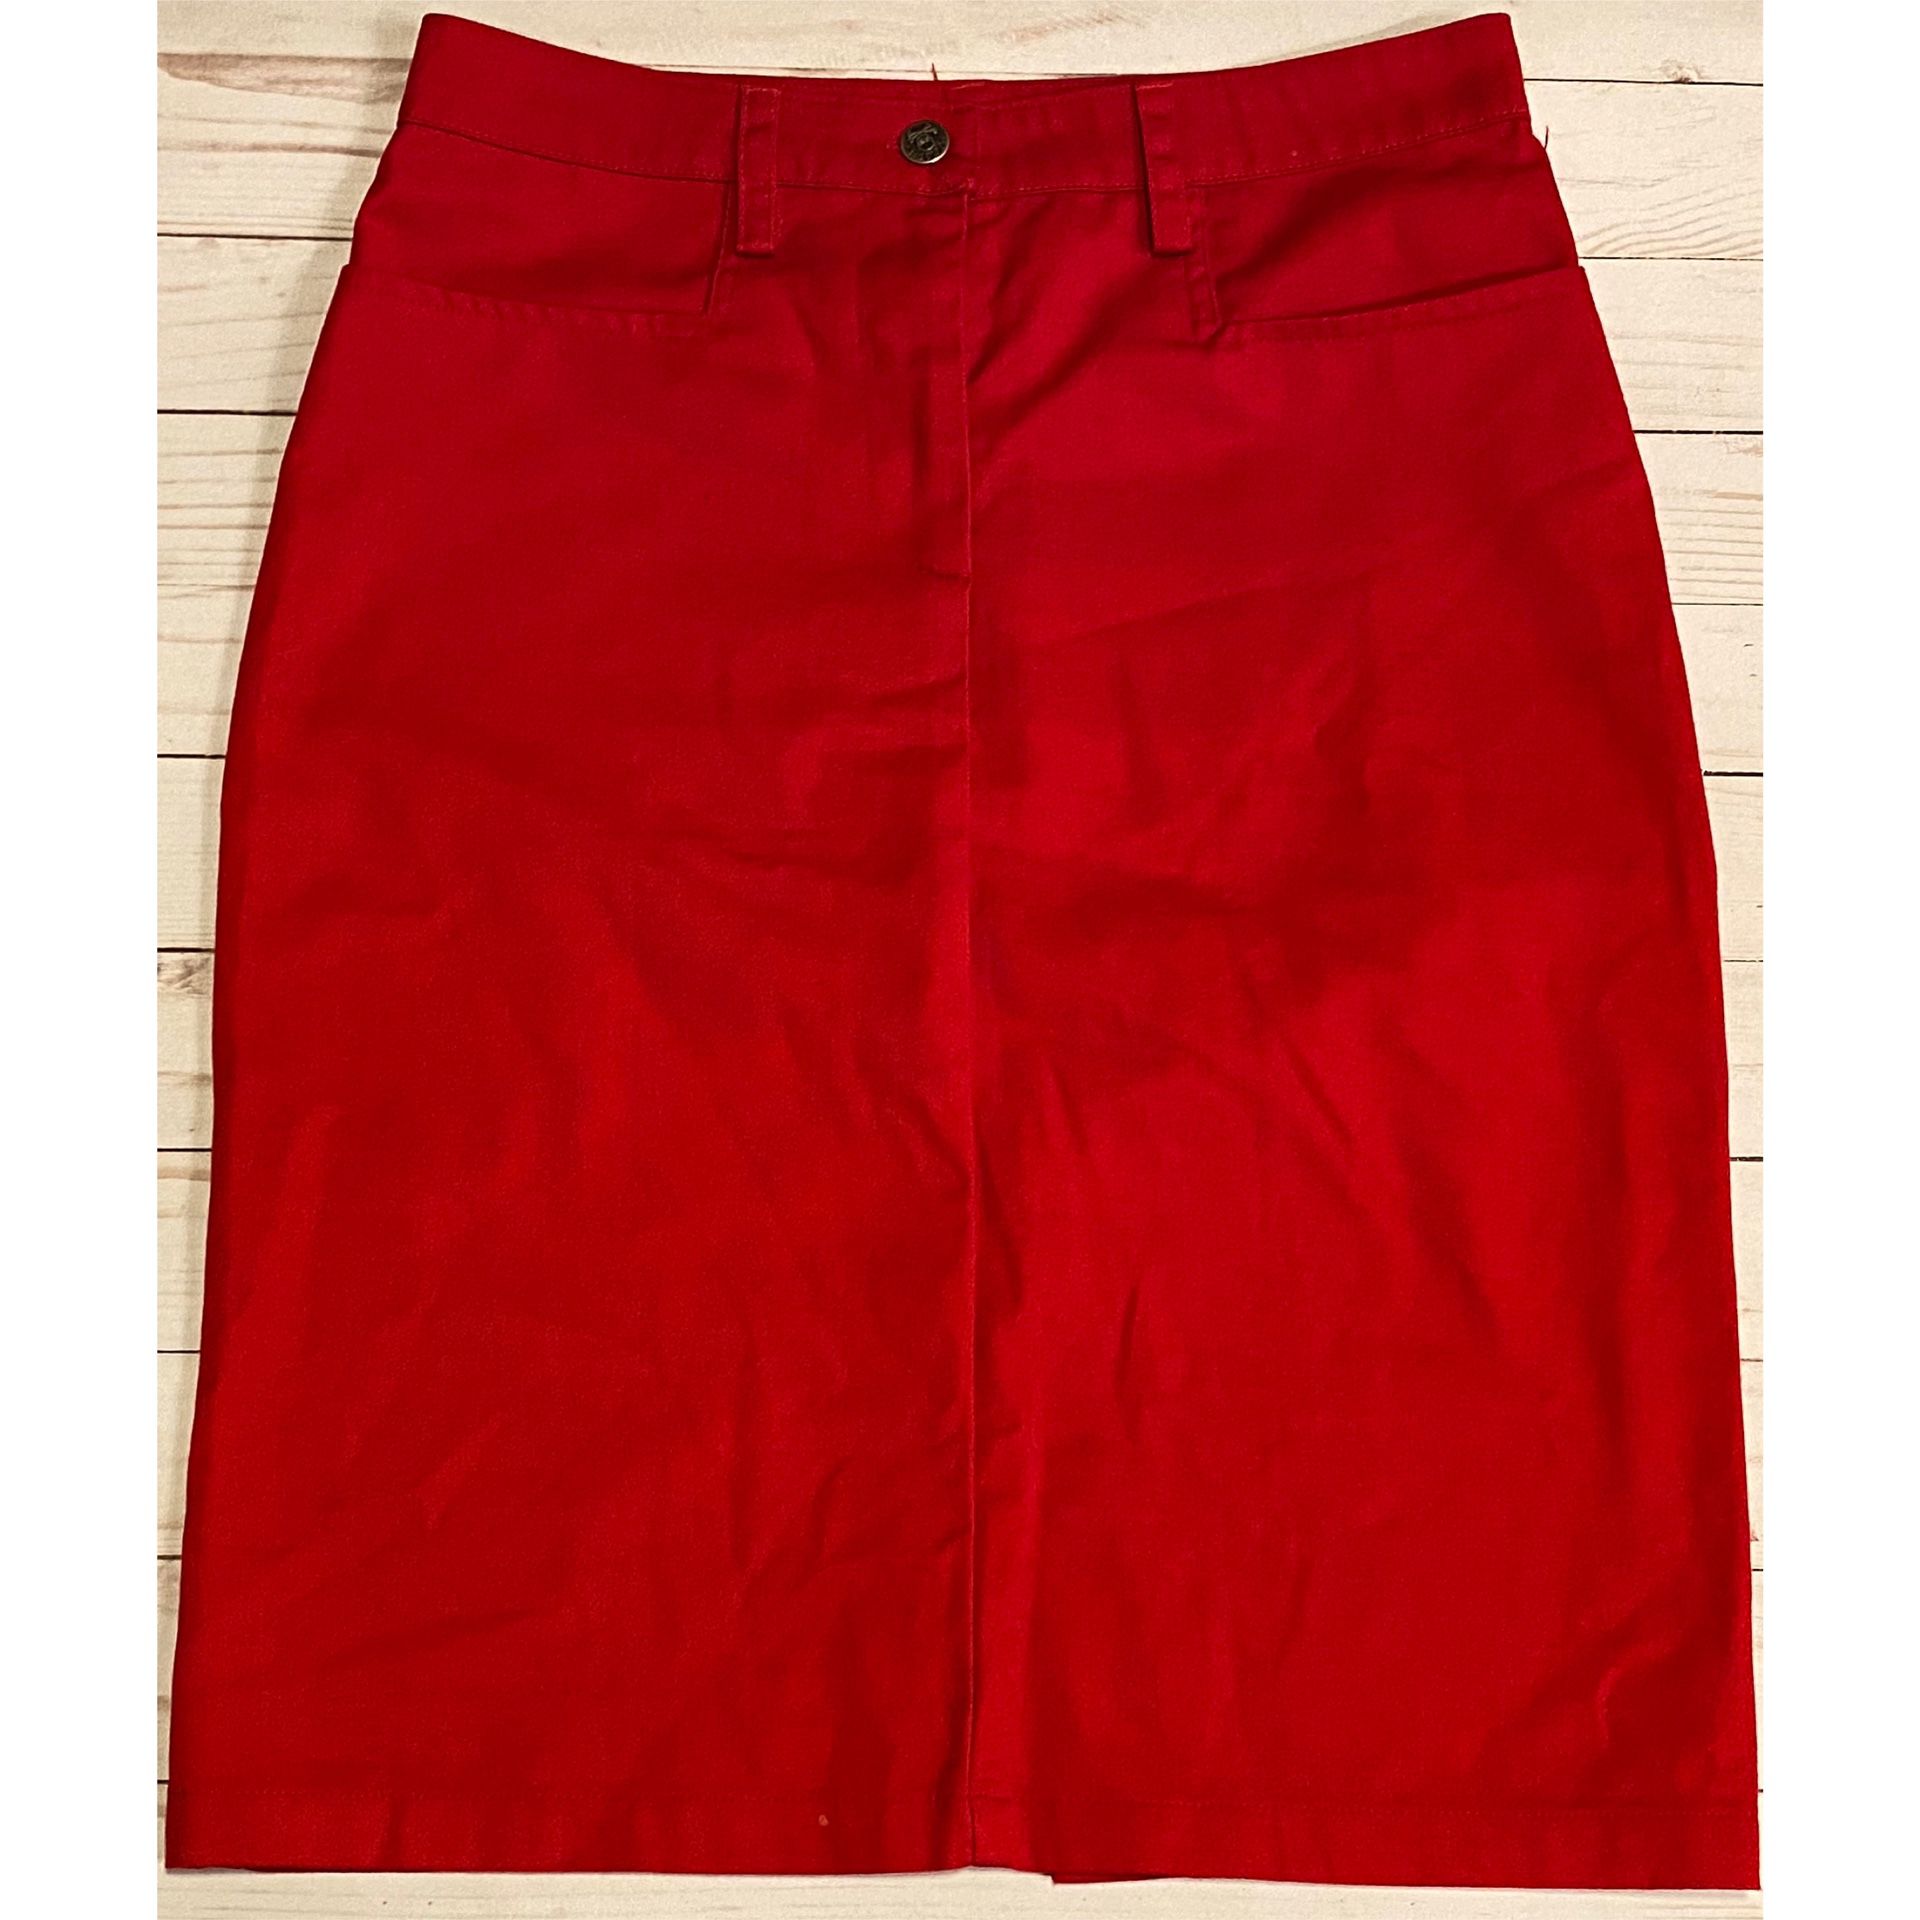 Lucky 13 Rockabilly Pinup Red Pencil Skirt Small